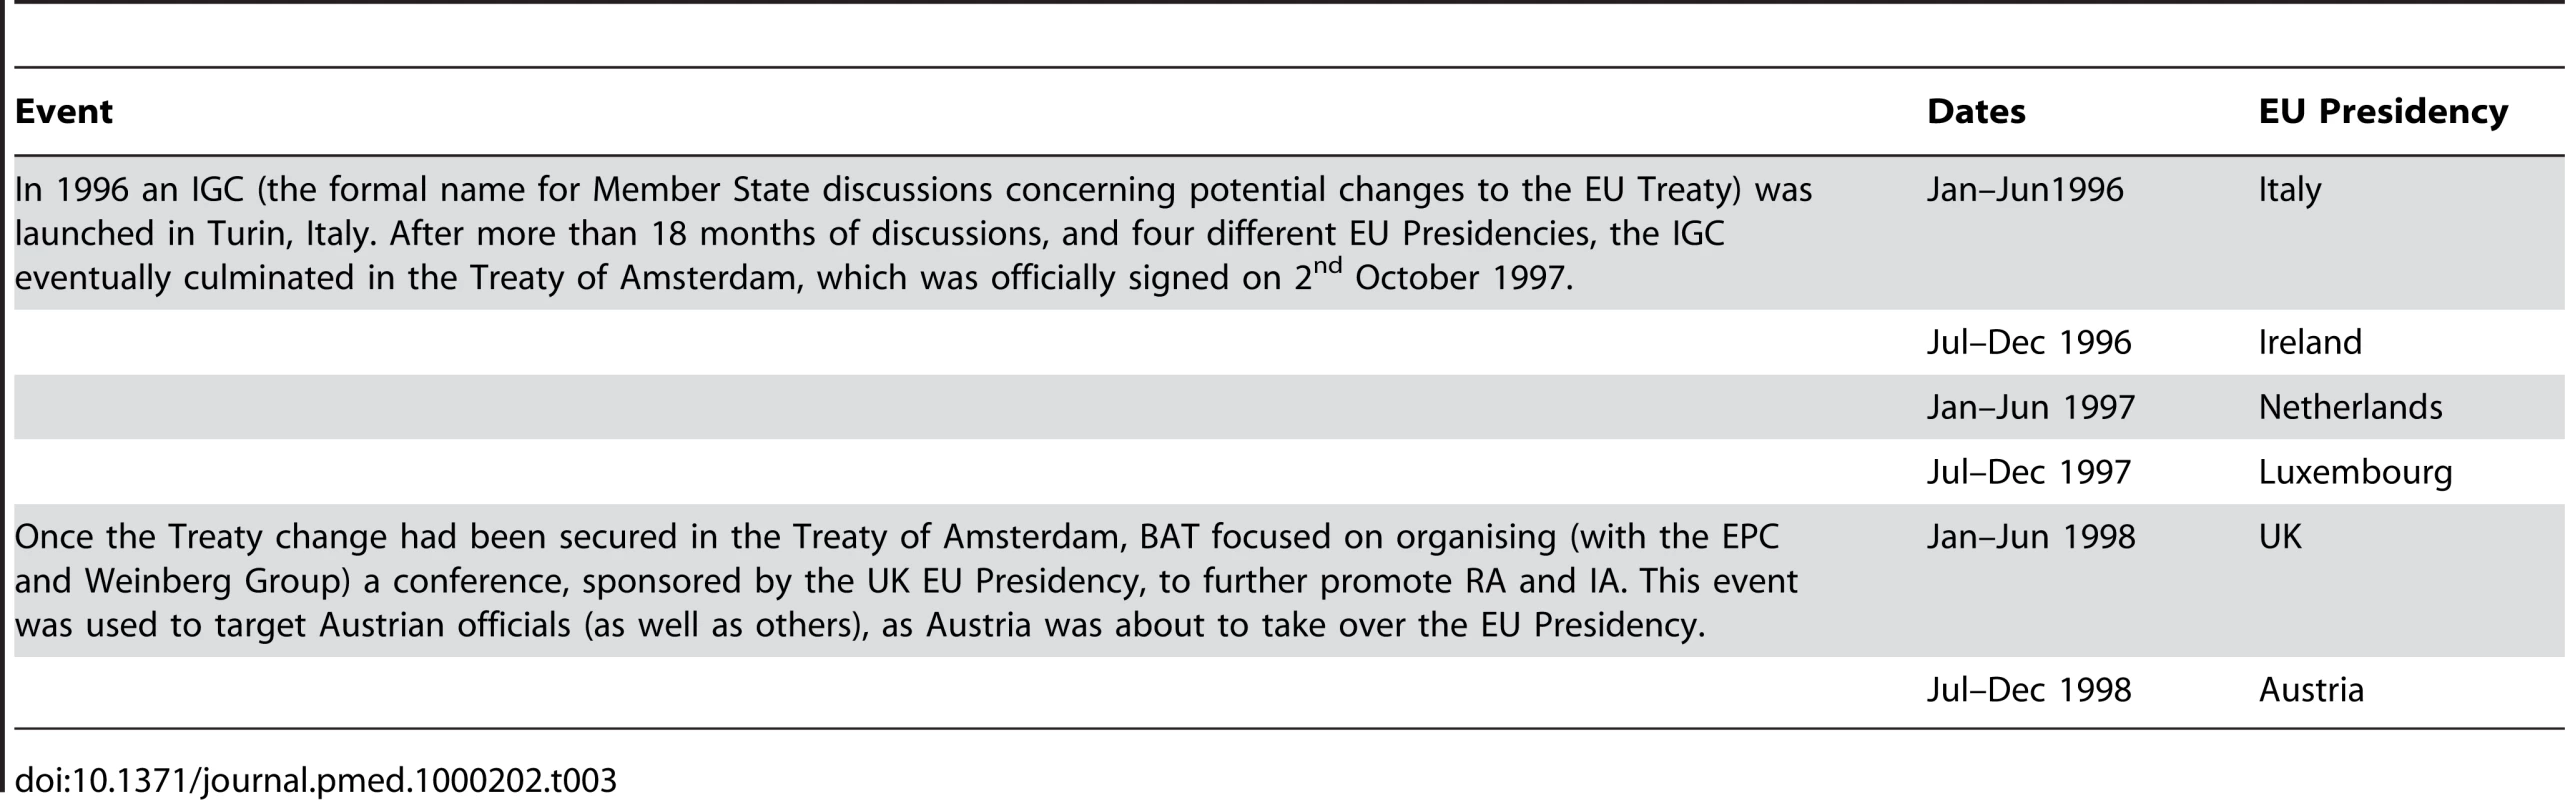 Timeline of six-month rotating EU Presidencies during and immediately after the 1996–1997 Inter-governmental Conference.